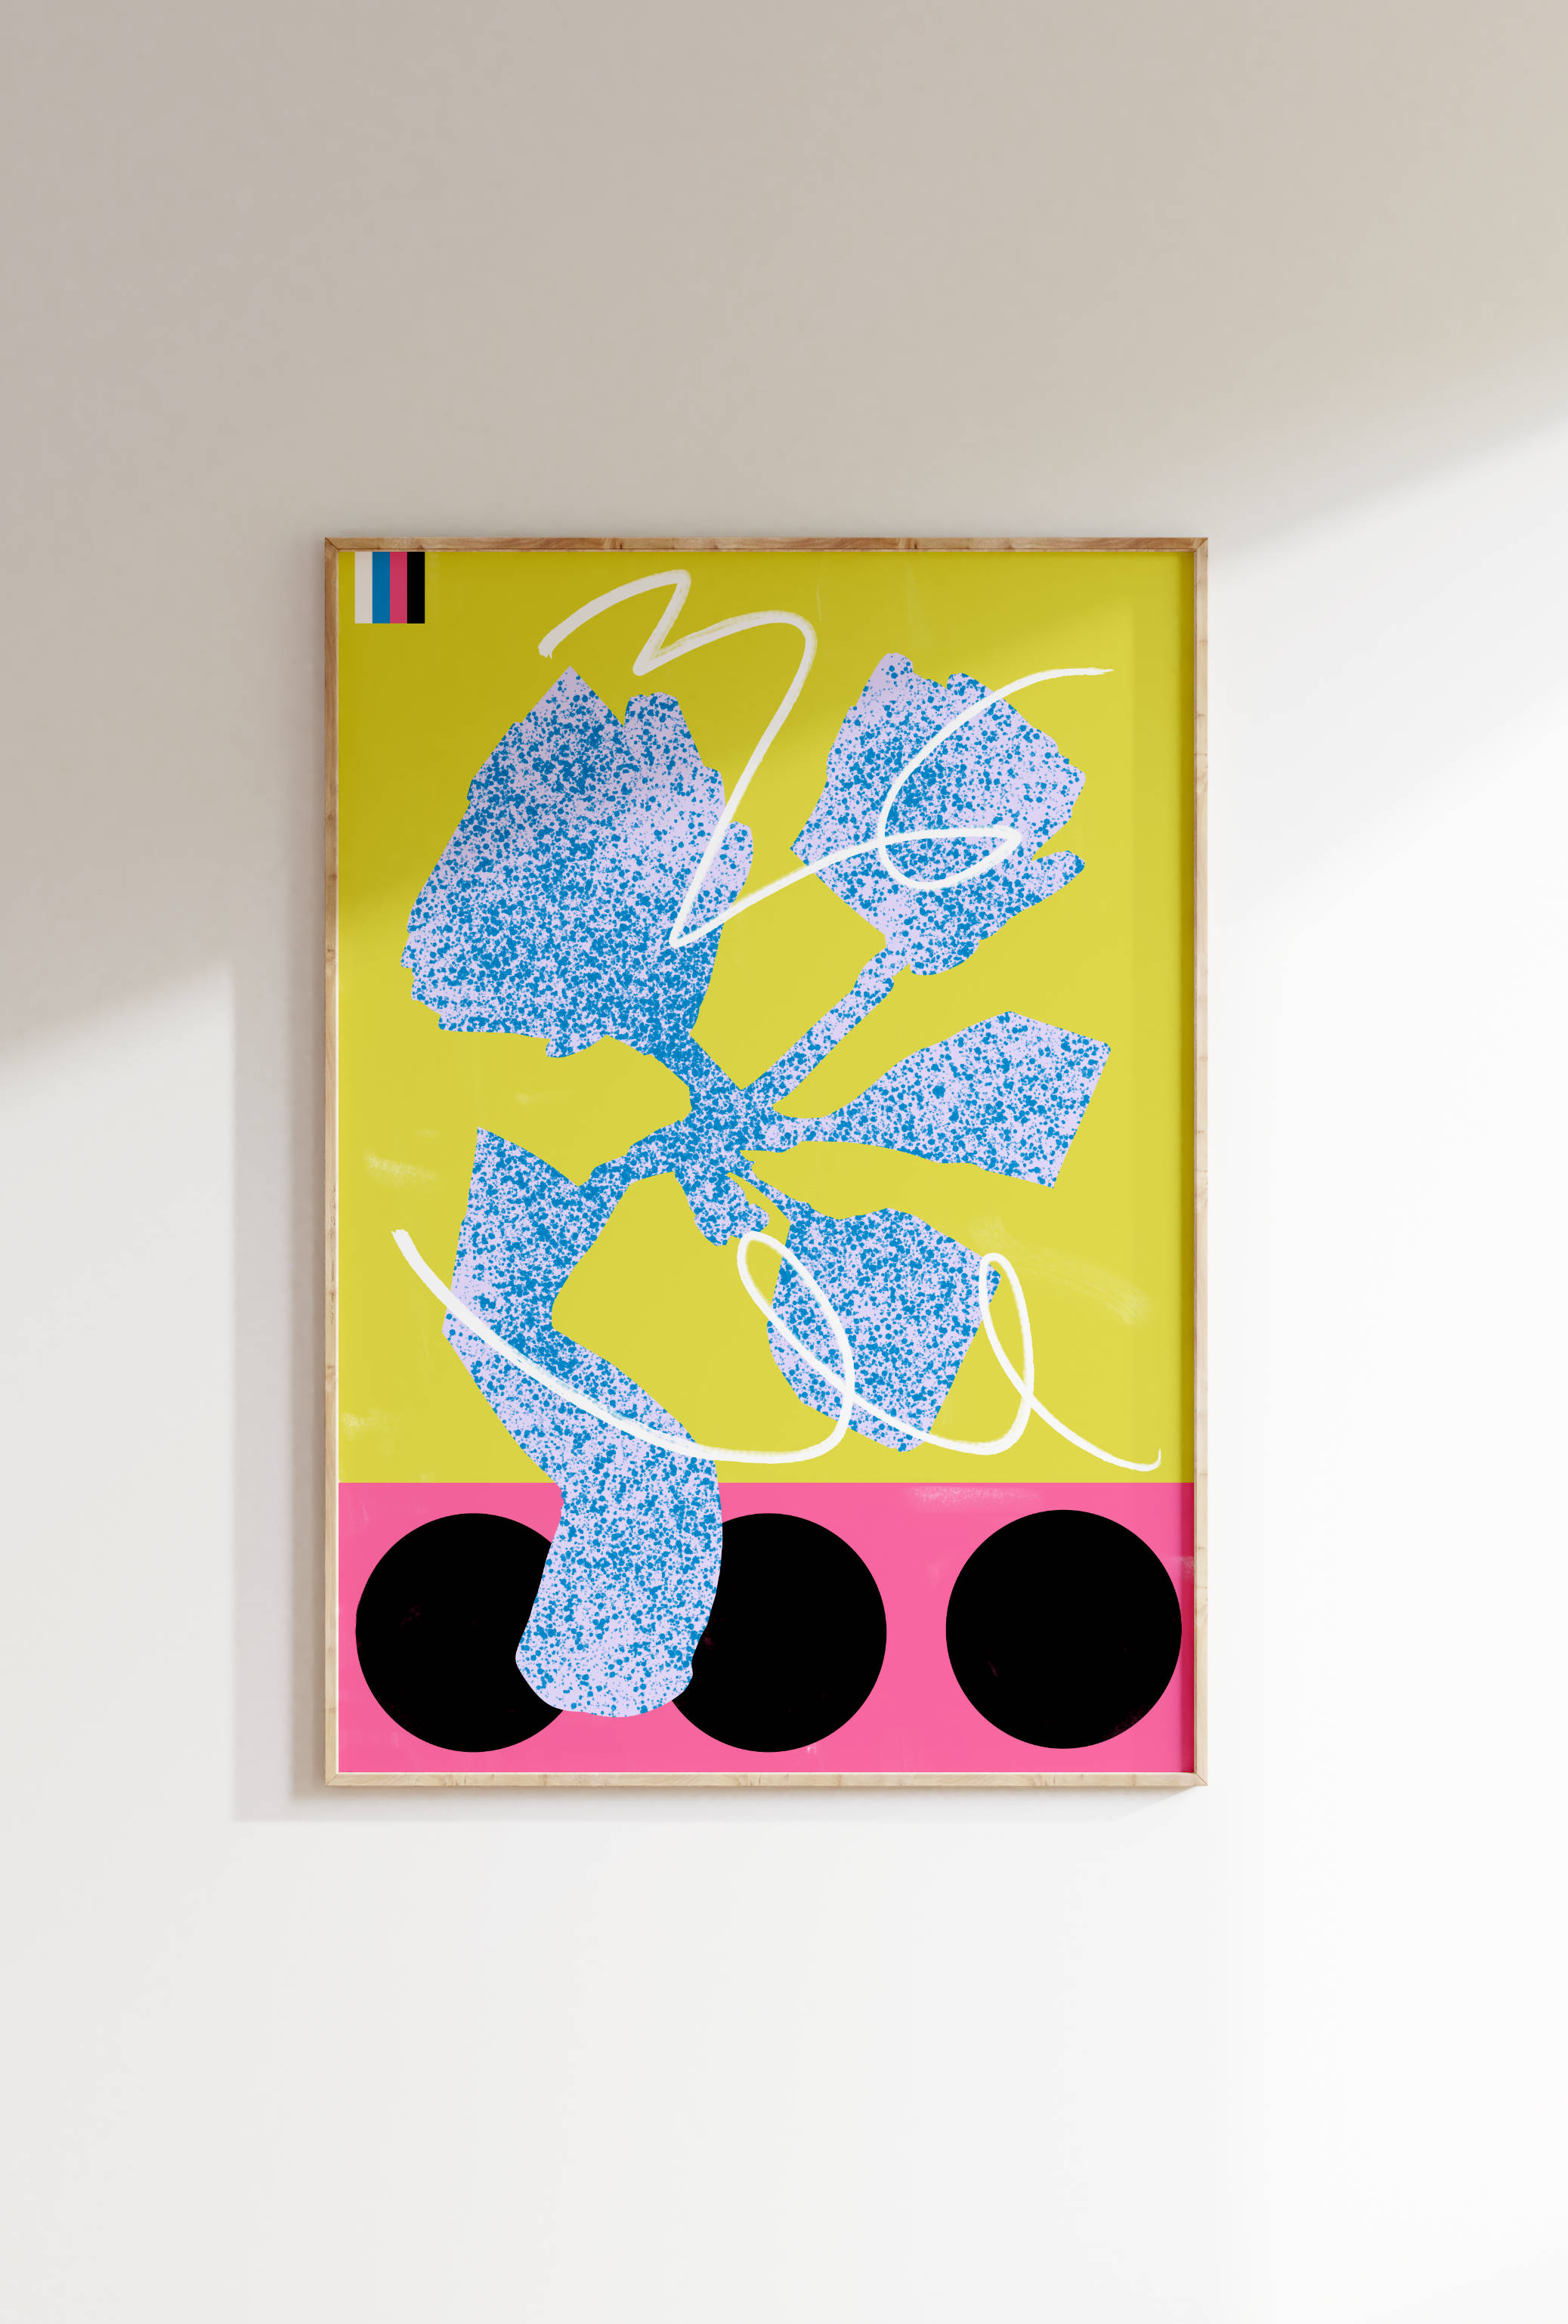 Photograph of Branche, graphic poster designed by Lena Robin with bright yellow colors